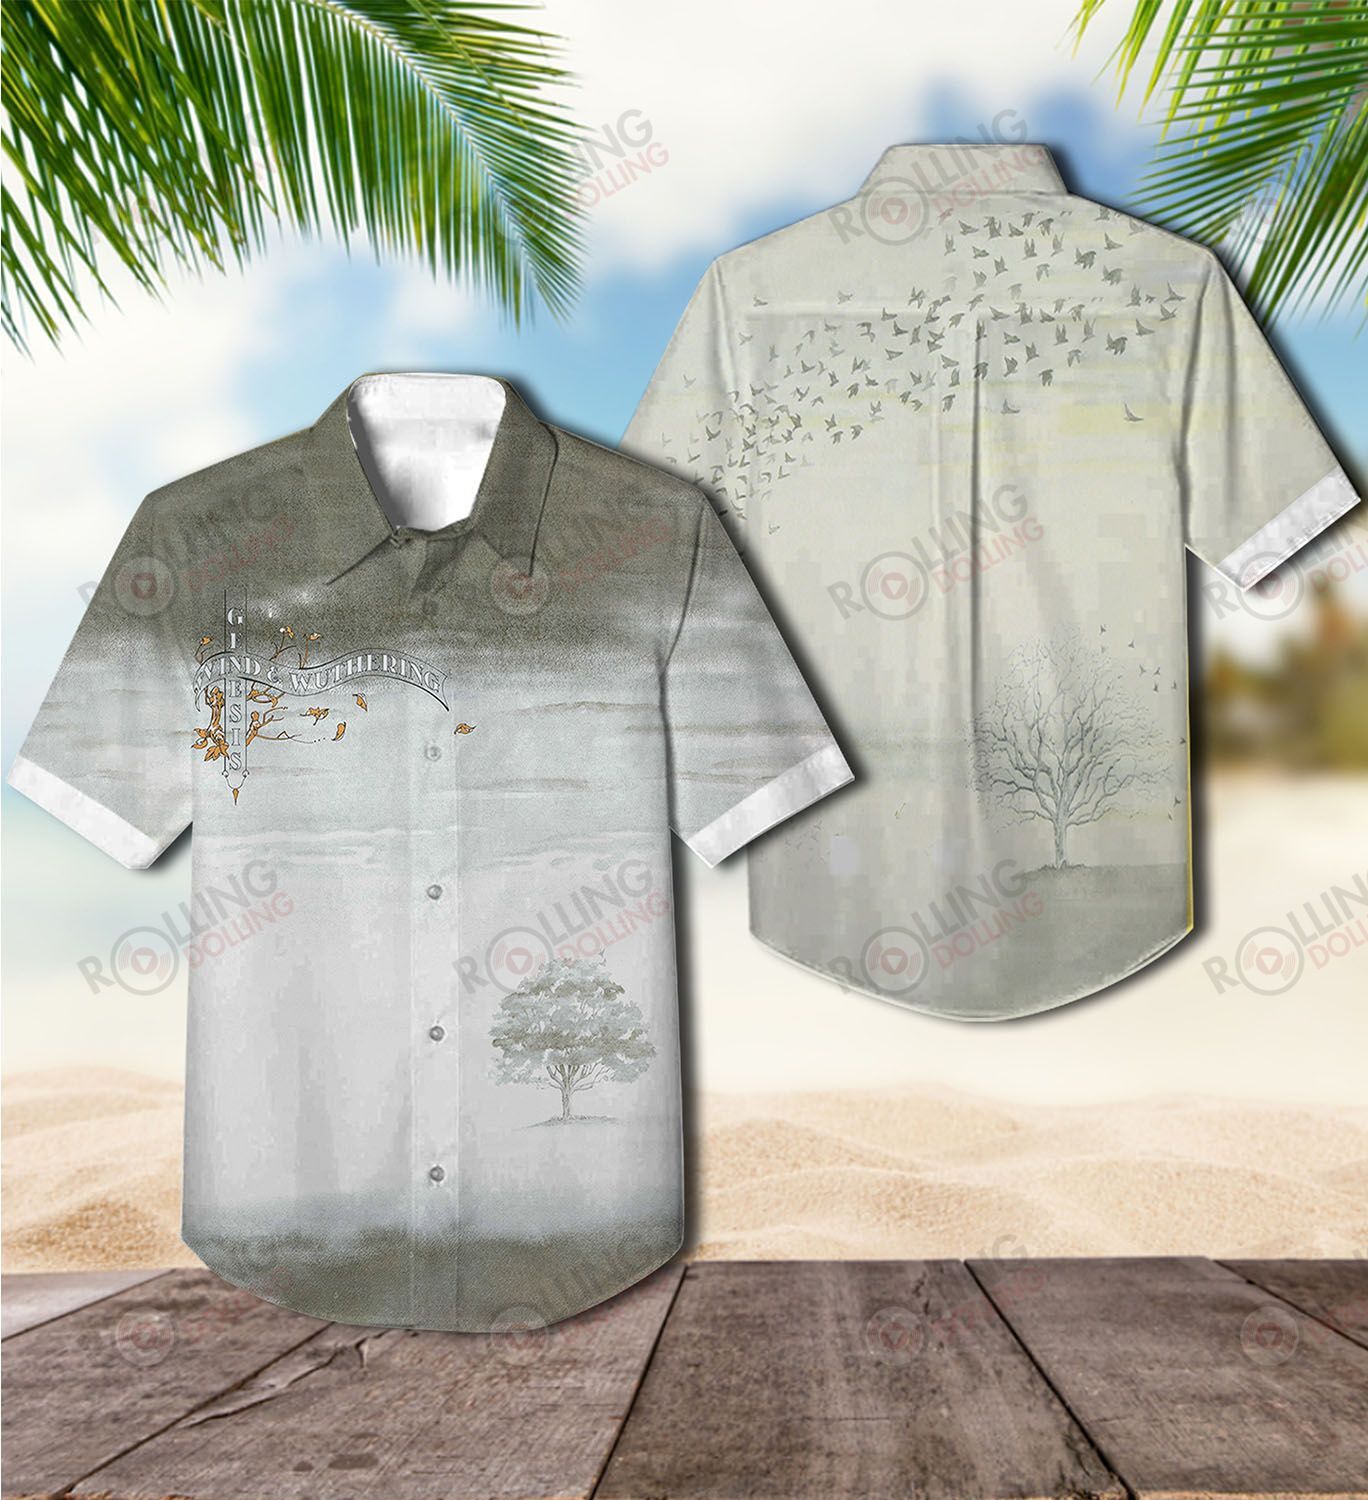 For summer, consider wearing This Amazing Hawaiian Shirt shirt in our store 205